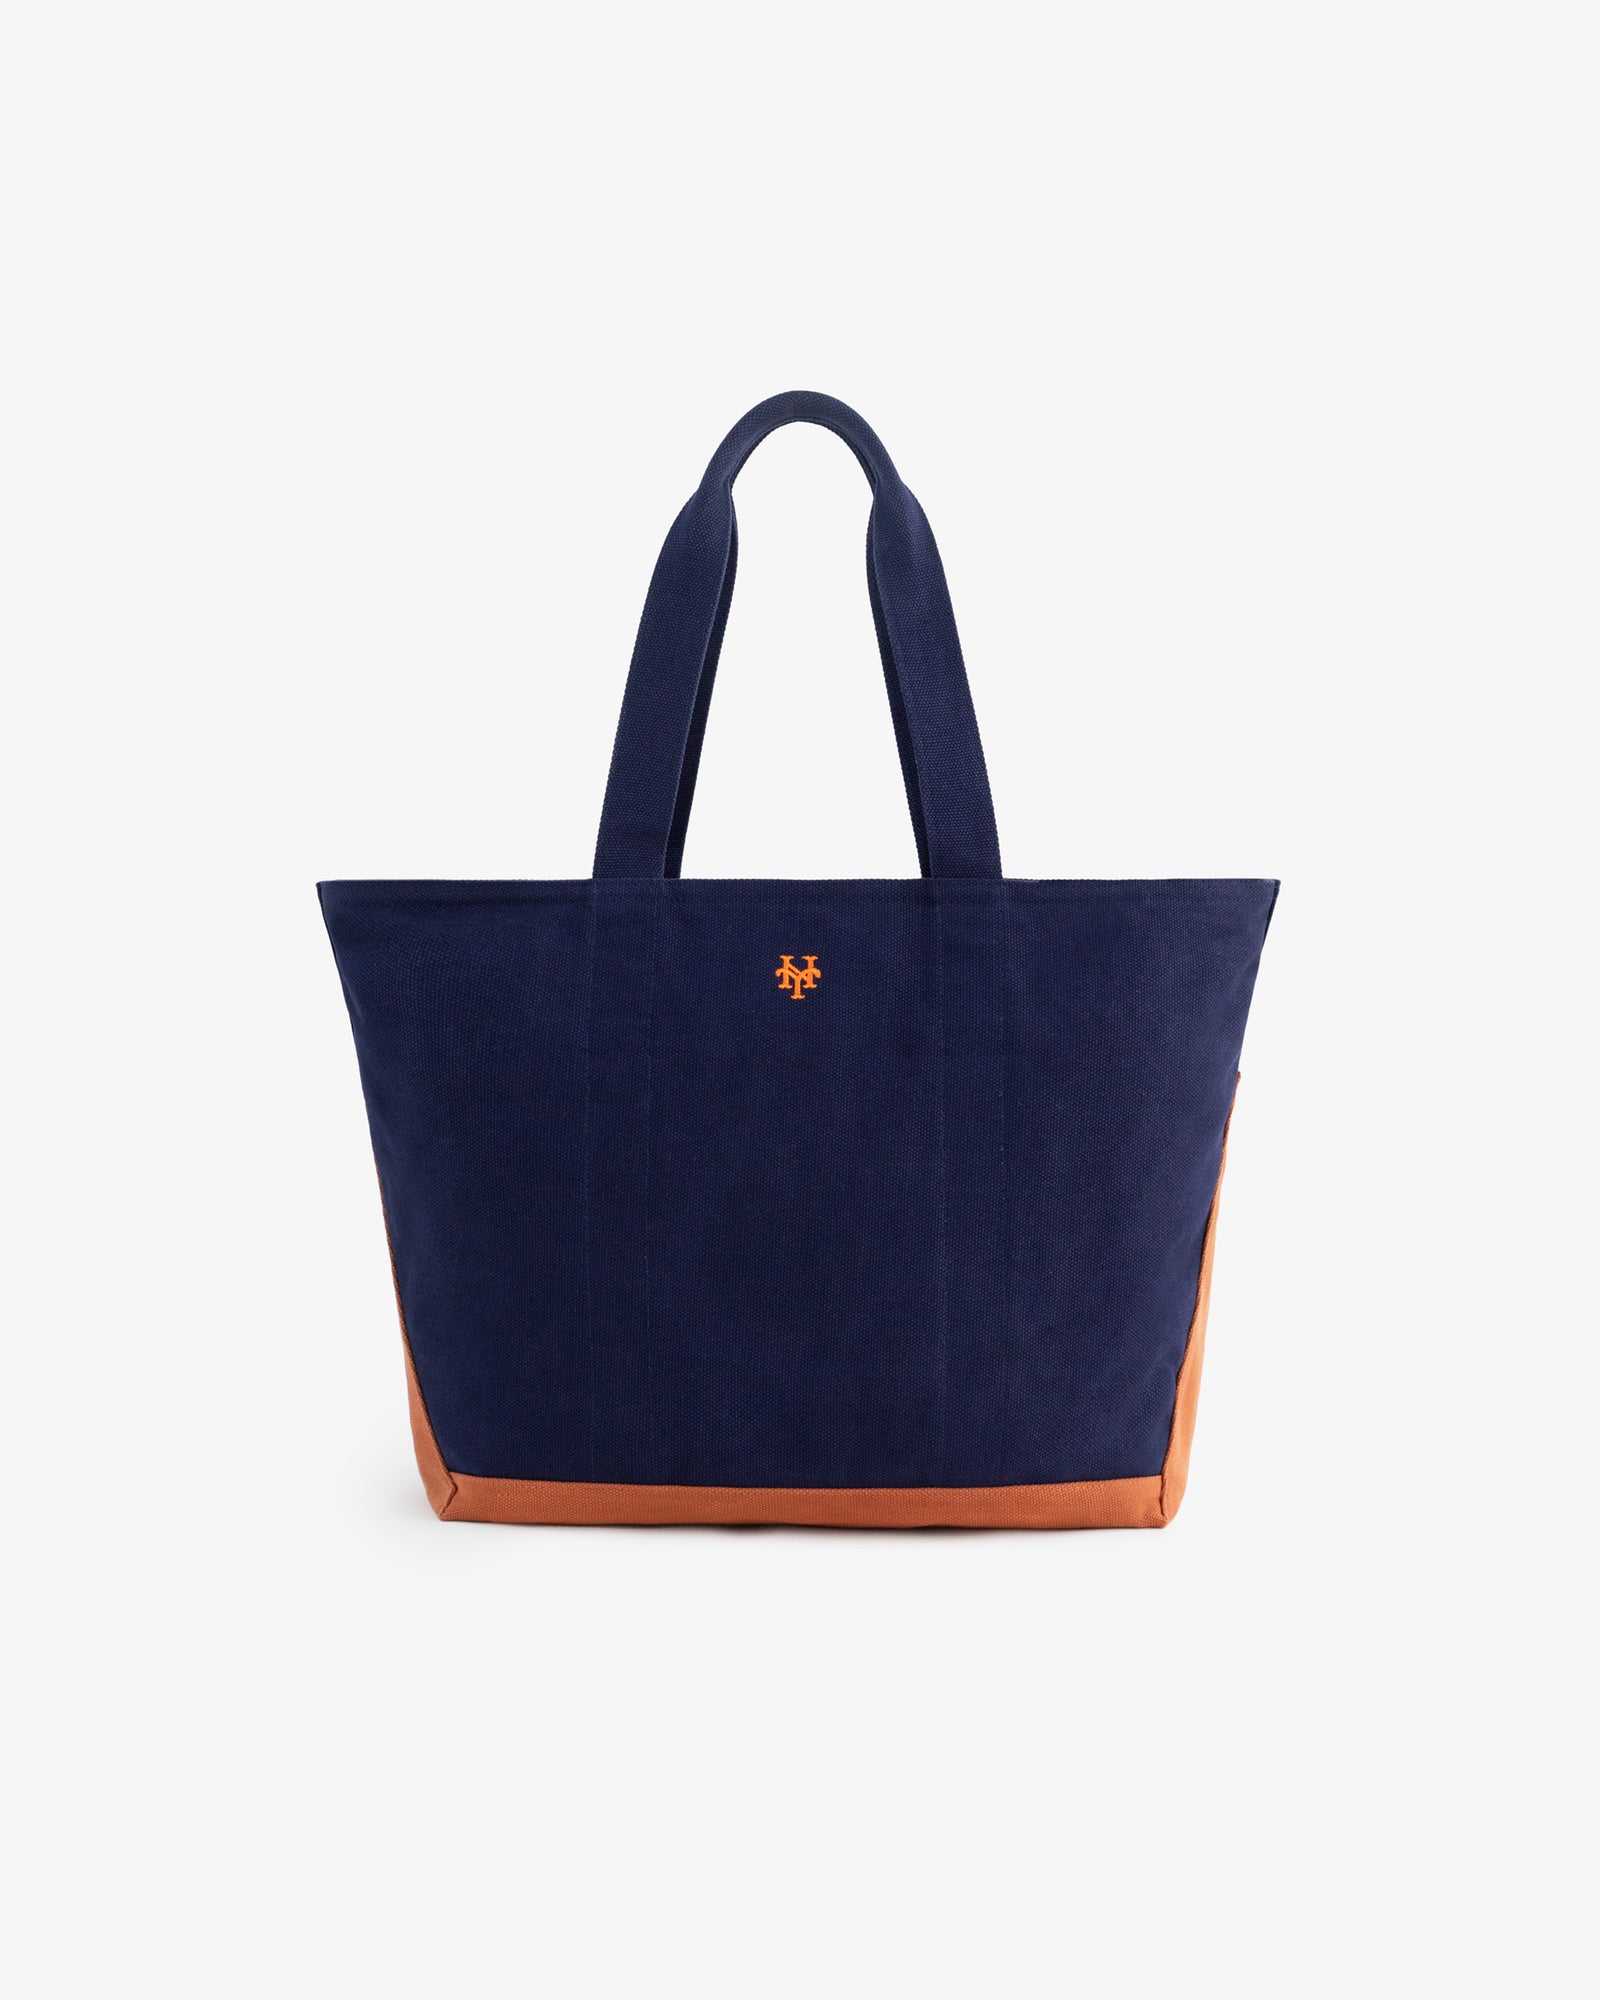 ALD / New York Mets Canvas Tote Bag